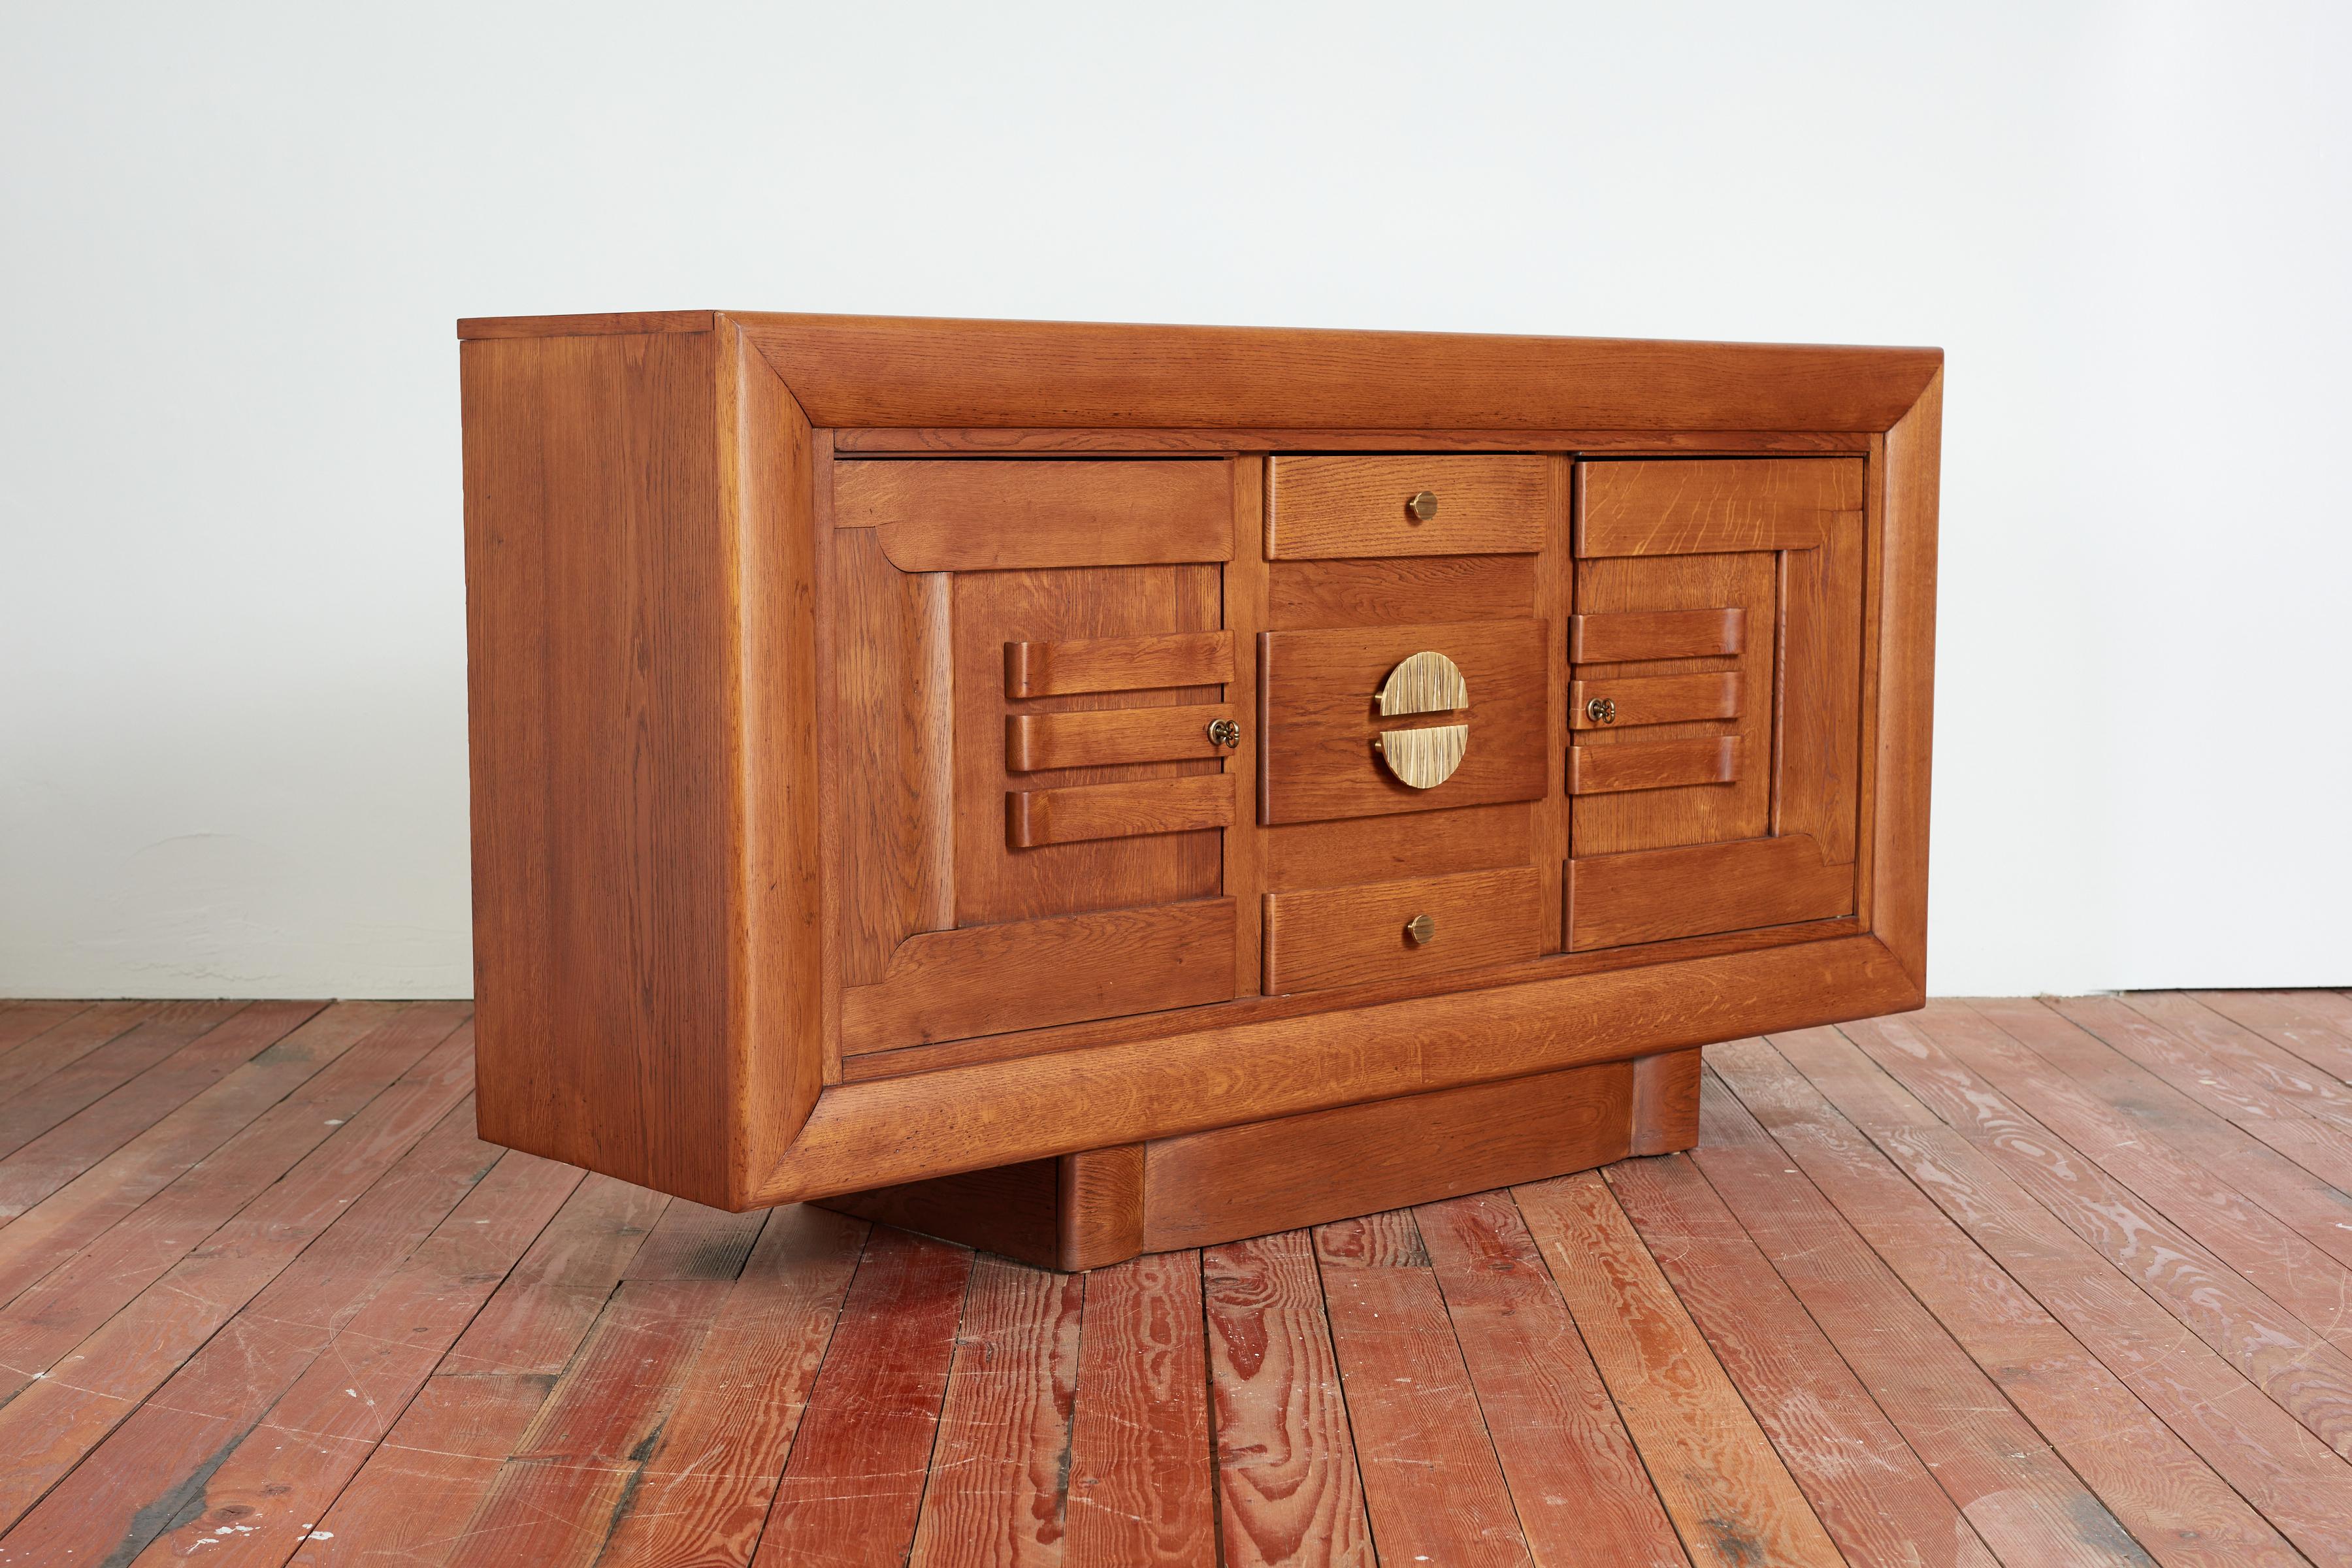 Gorgeous 1940's French Oak Sideboard floating on a plinth with intricate solid bronze hardware. 
Oak has wonderful rich patina and doors open on each side with drawers down the center. 
Impressive in scale - 
France, 1940s